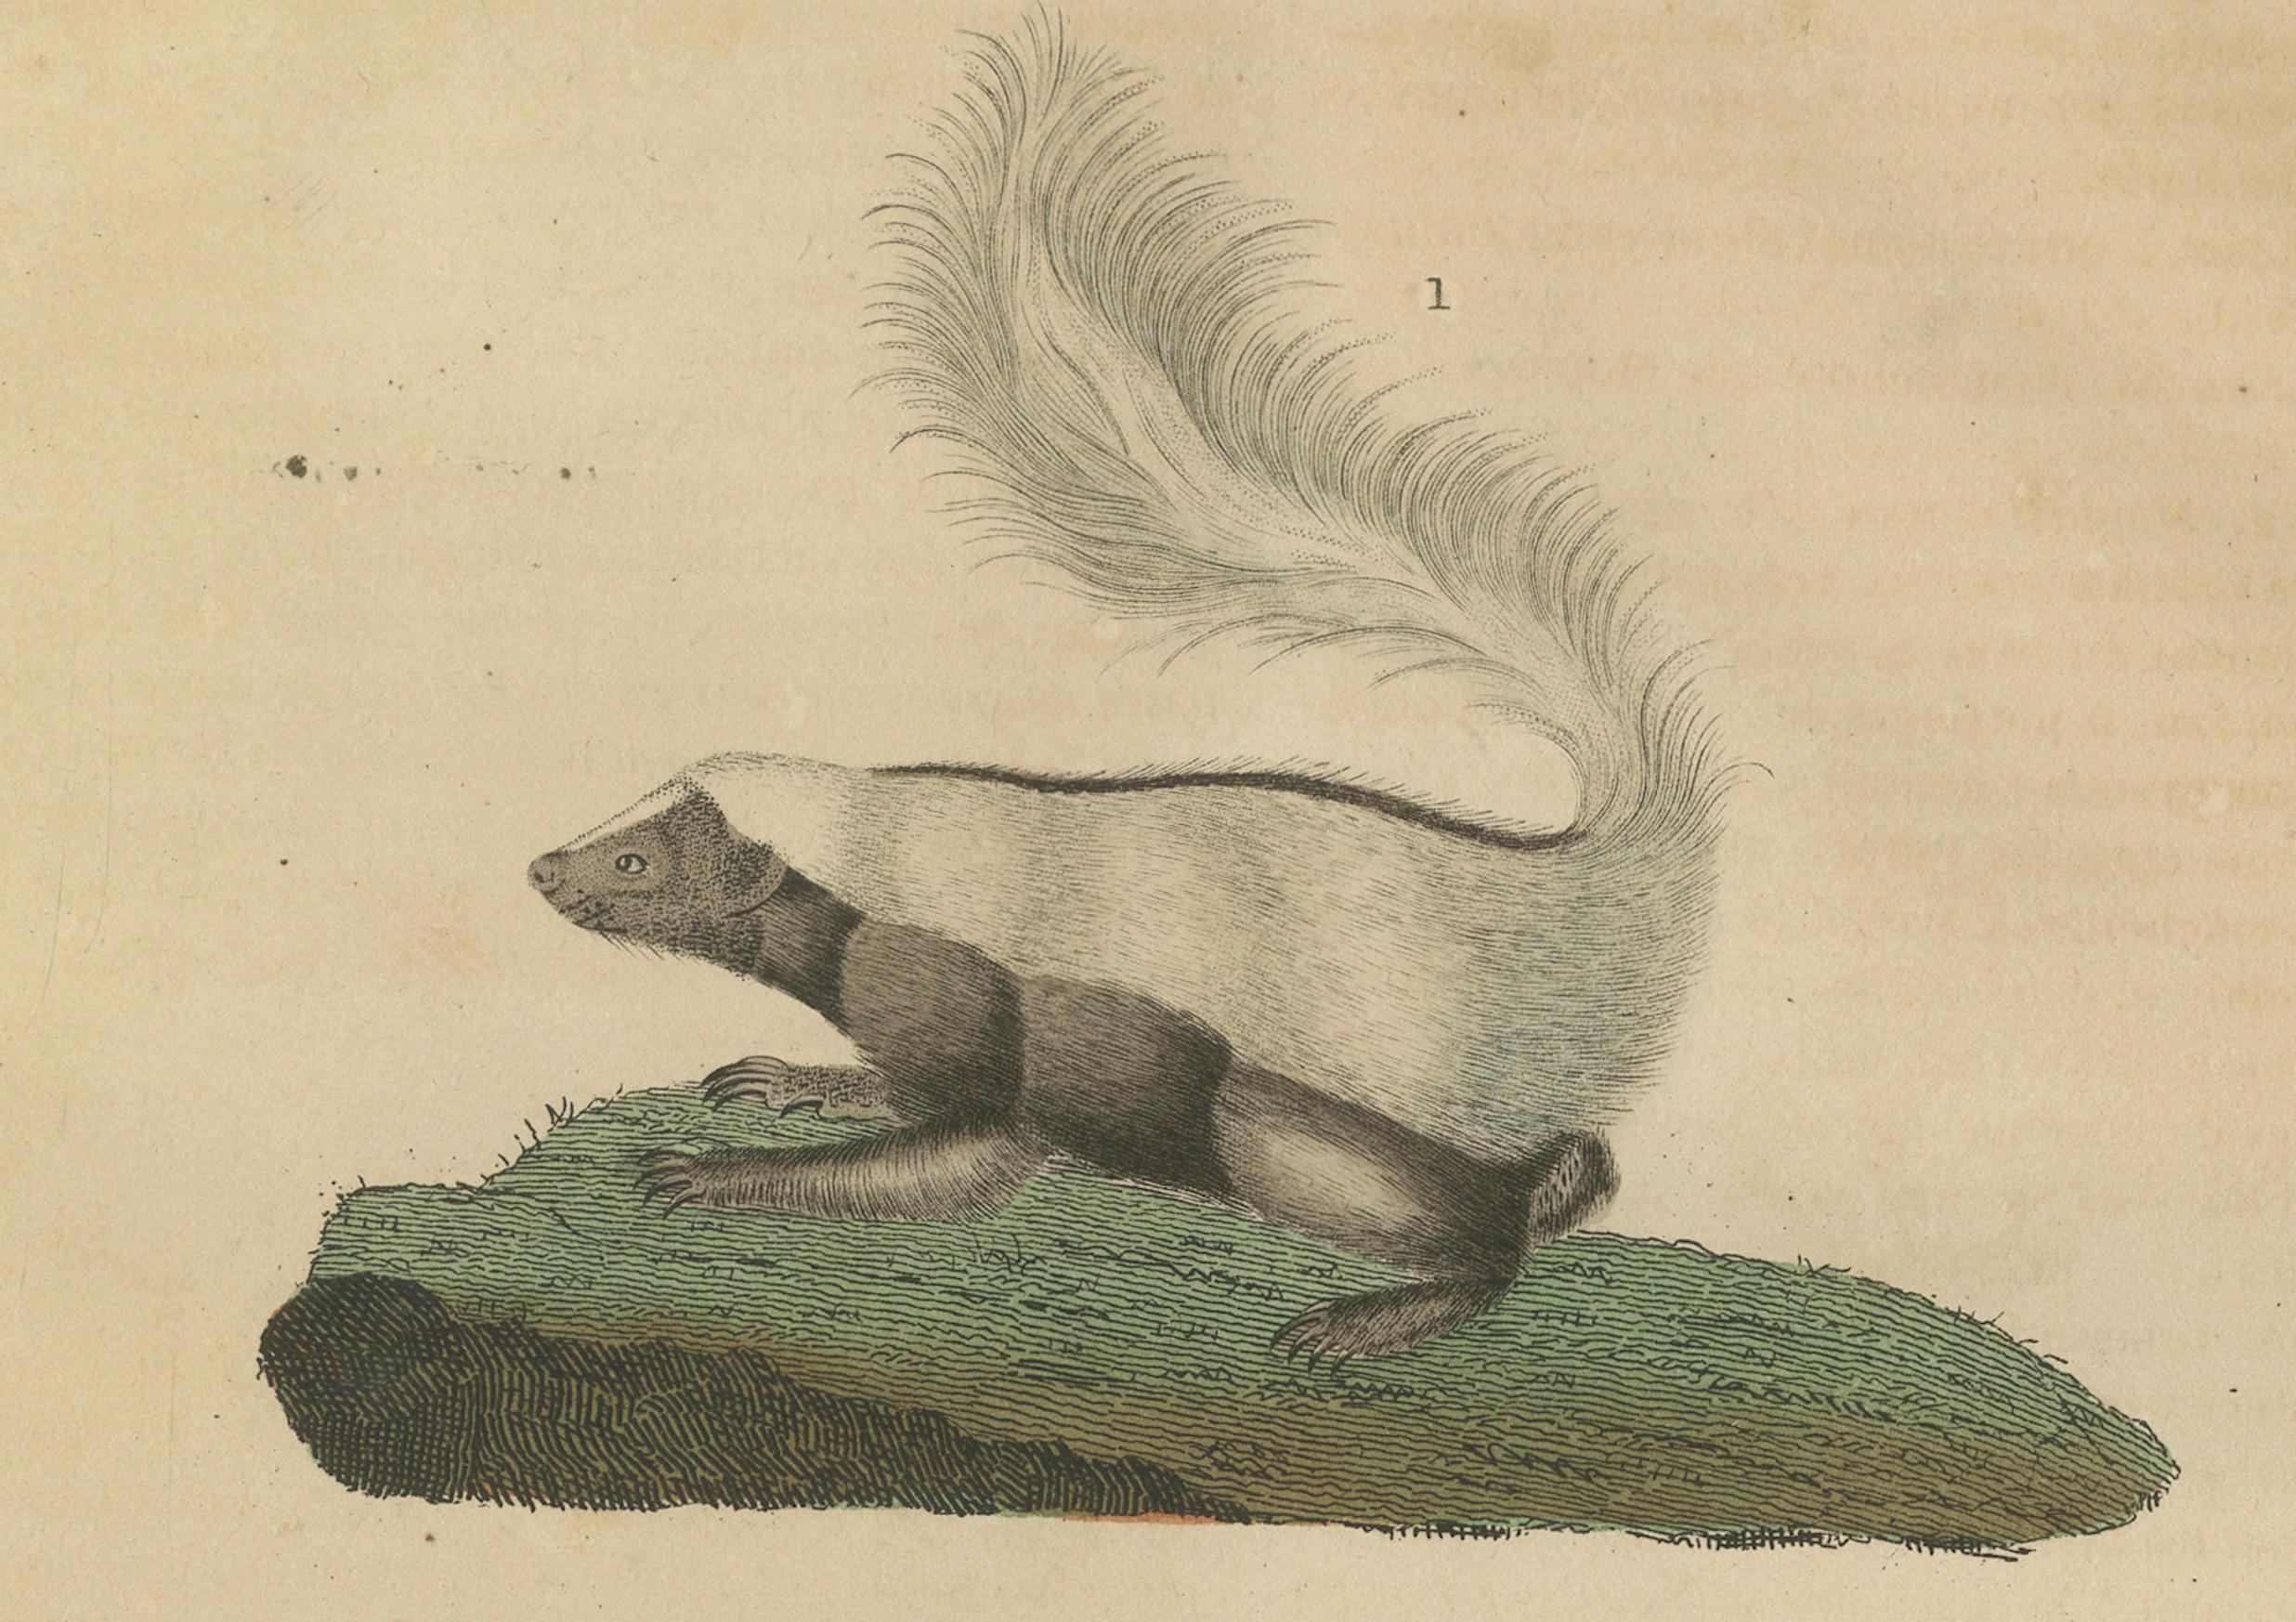 Paper Diverse Mammals Engraved and Hand-Colored: Skunk, Stink Badger, and Canid, 1845 For Sale